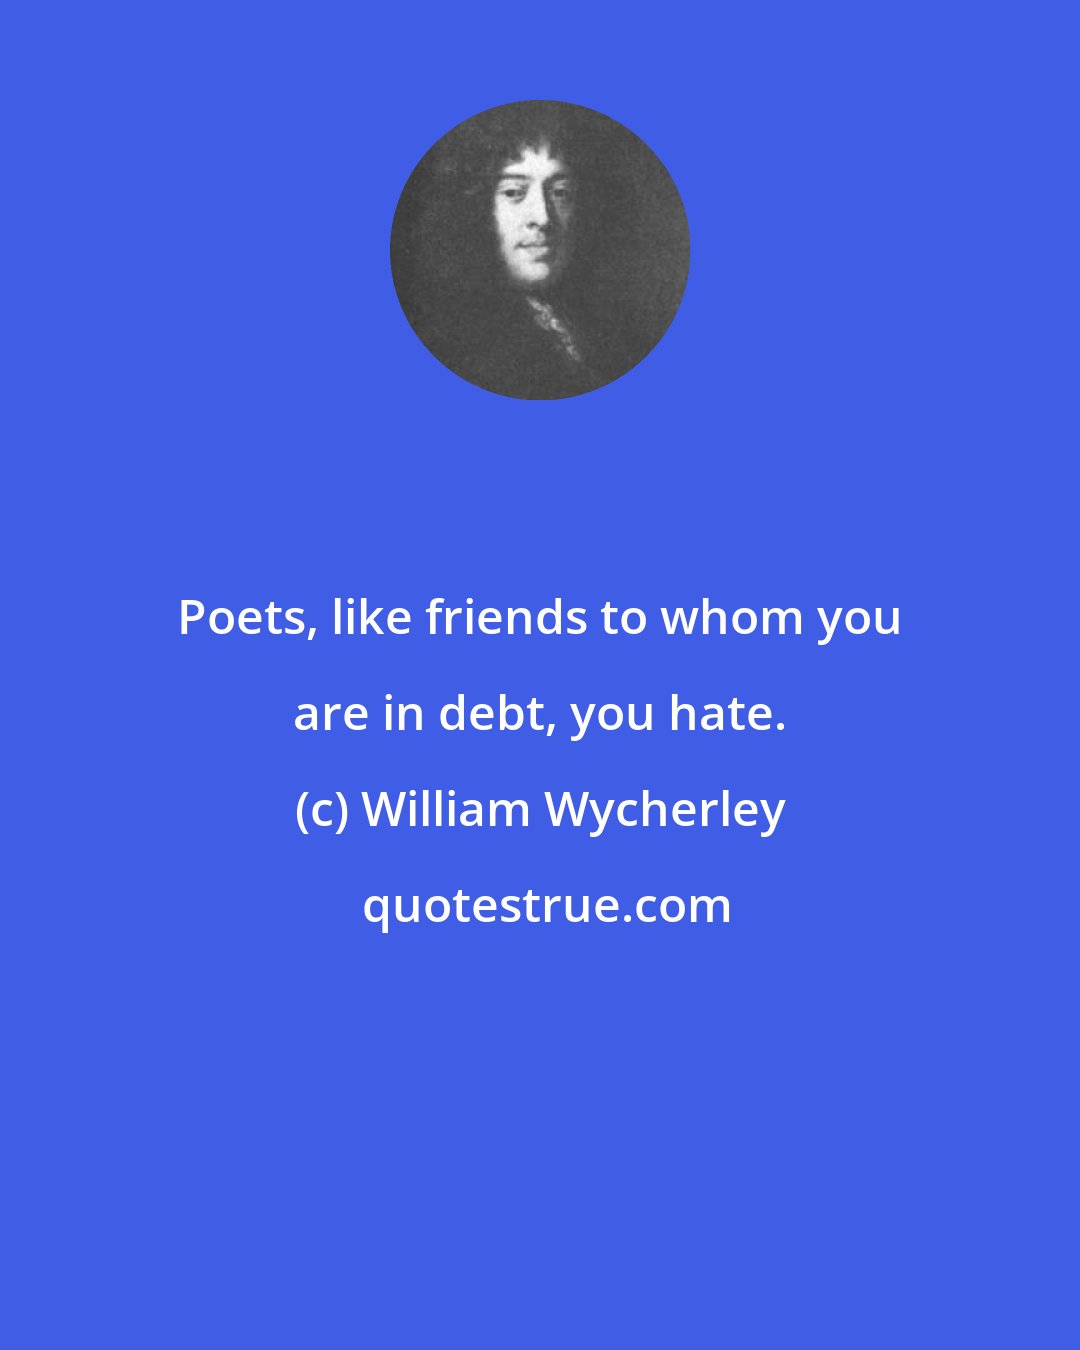 William Wycherley: Poets, like friends to whom you are in debt, you hate.